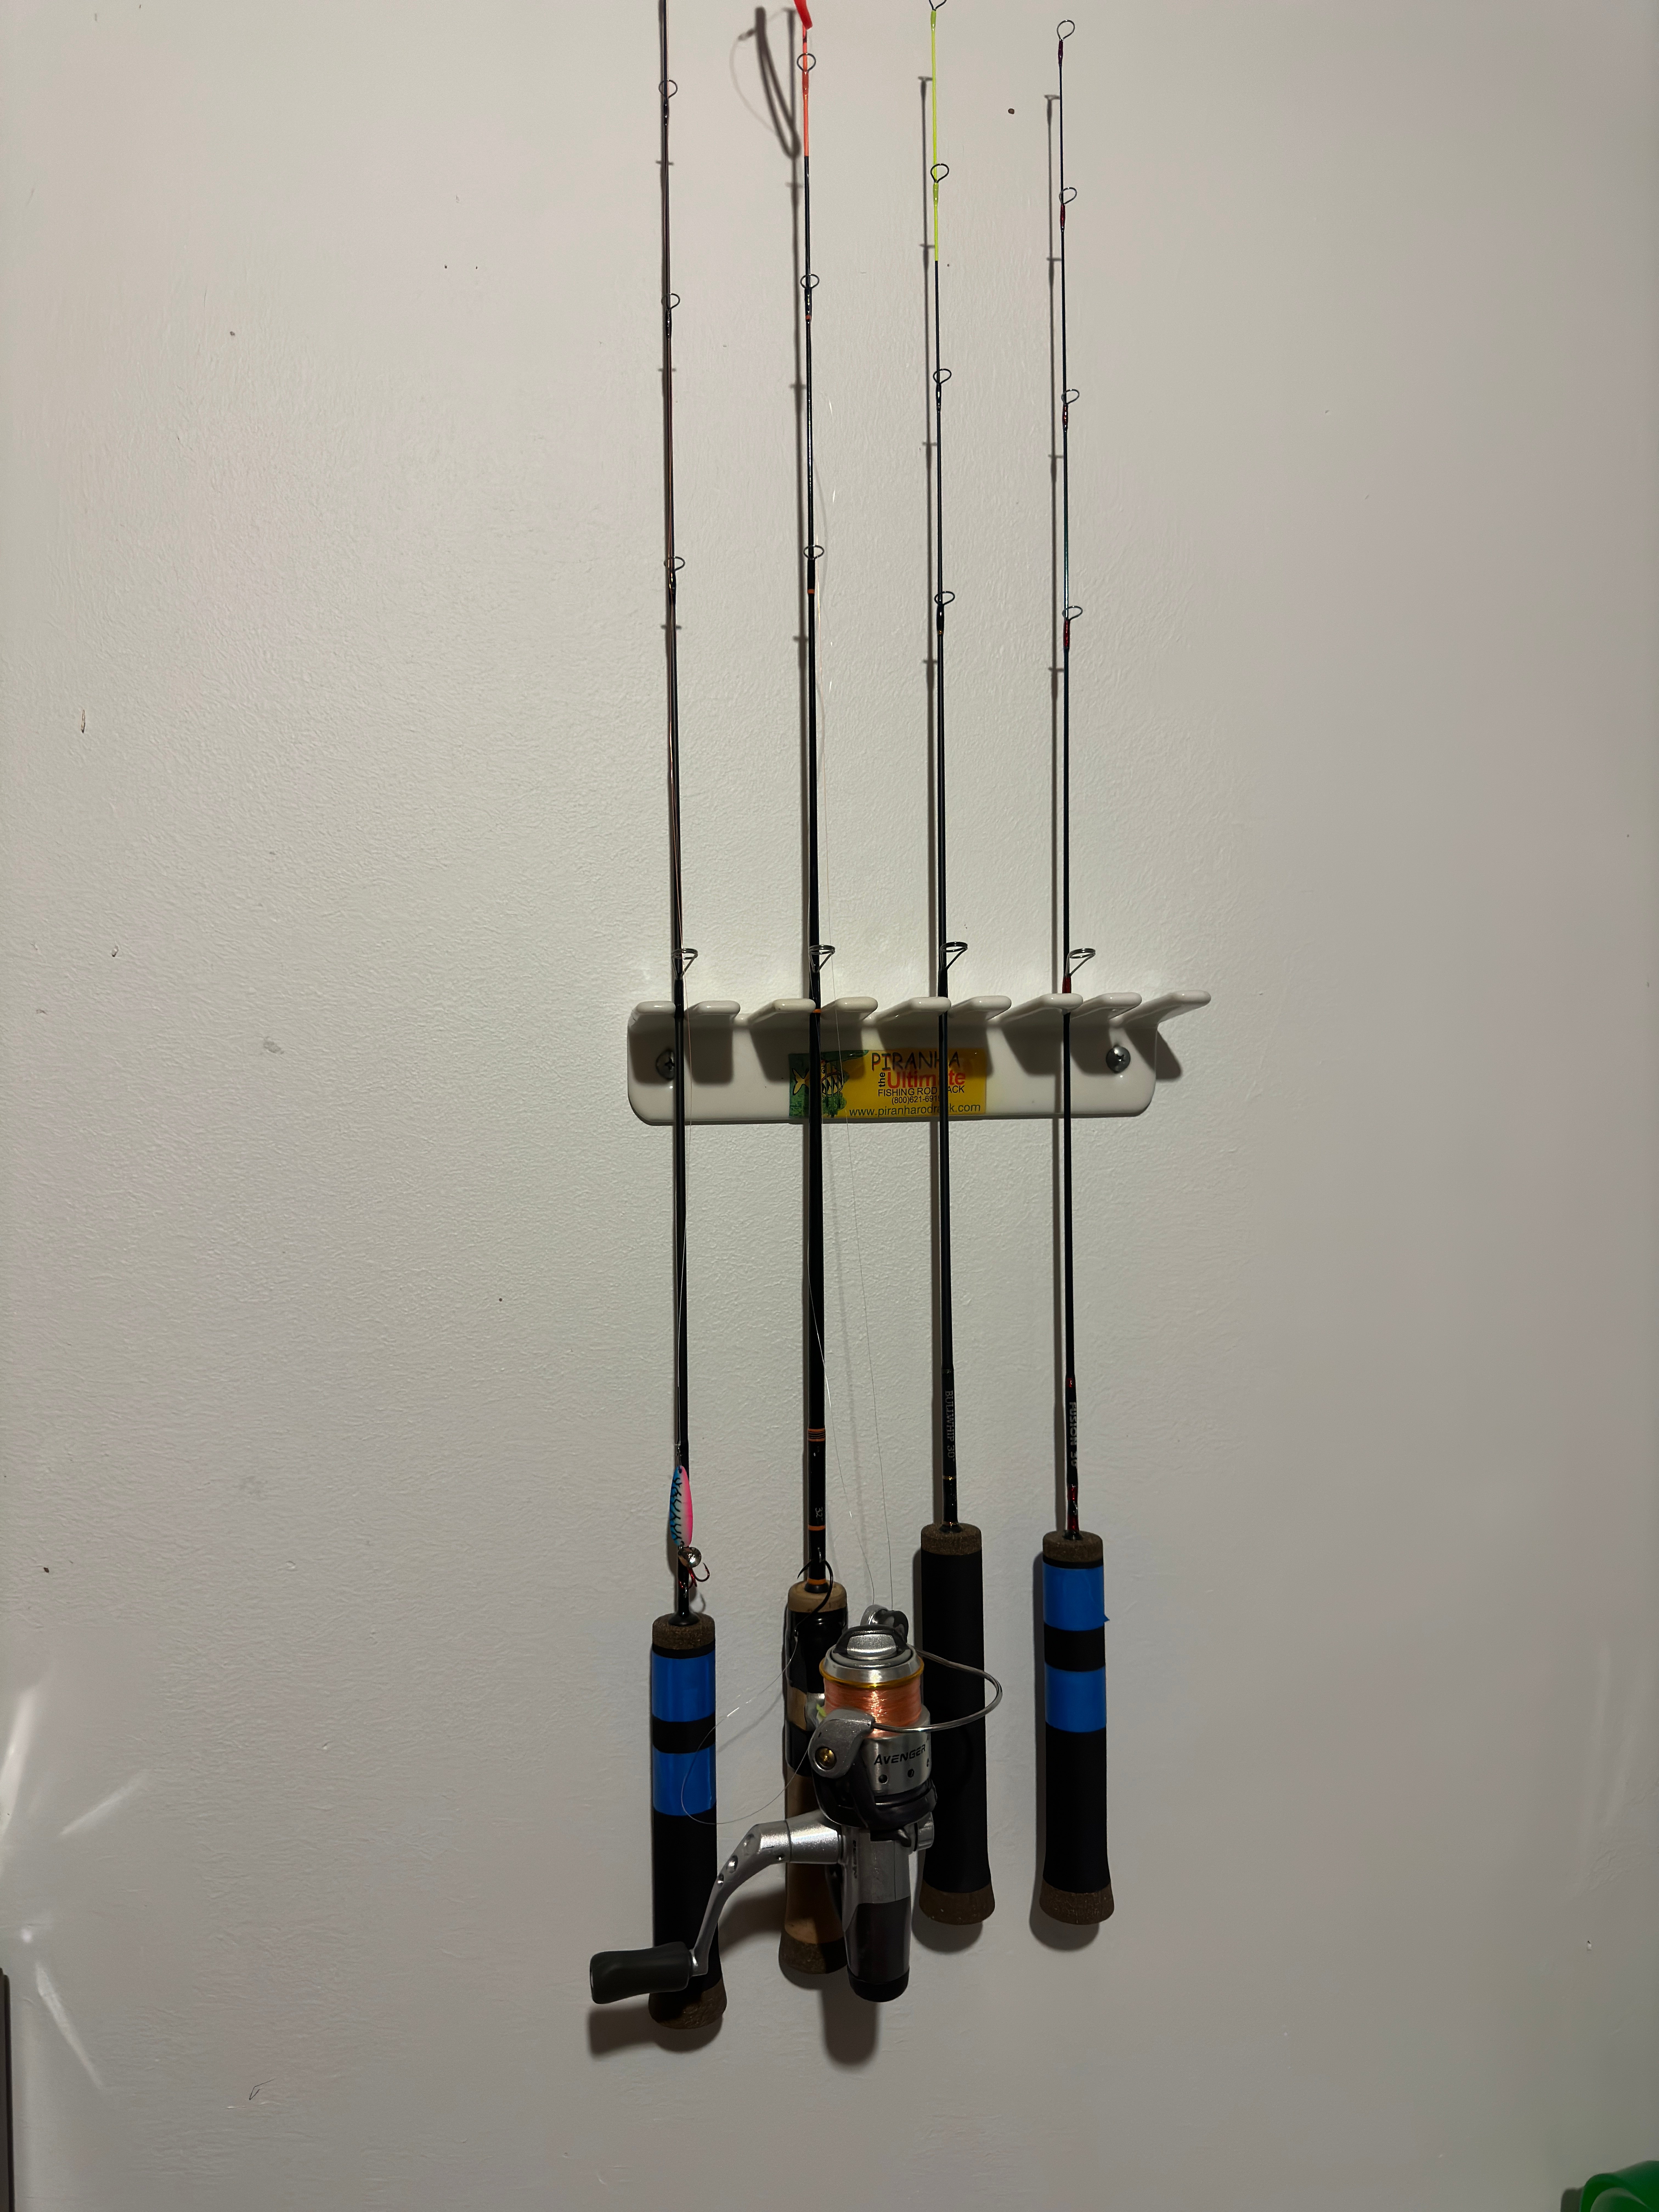 Rod storage - how do you guys store your rods in the off season